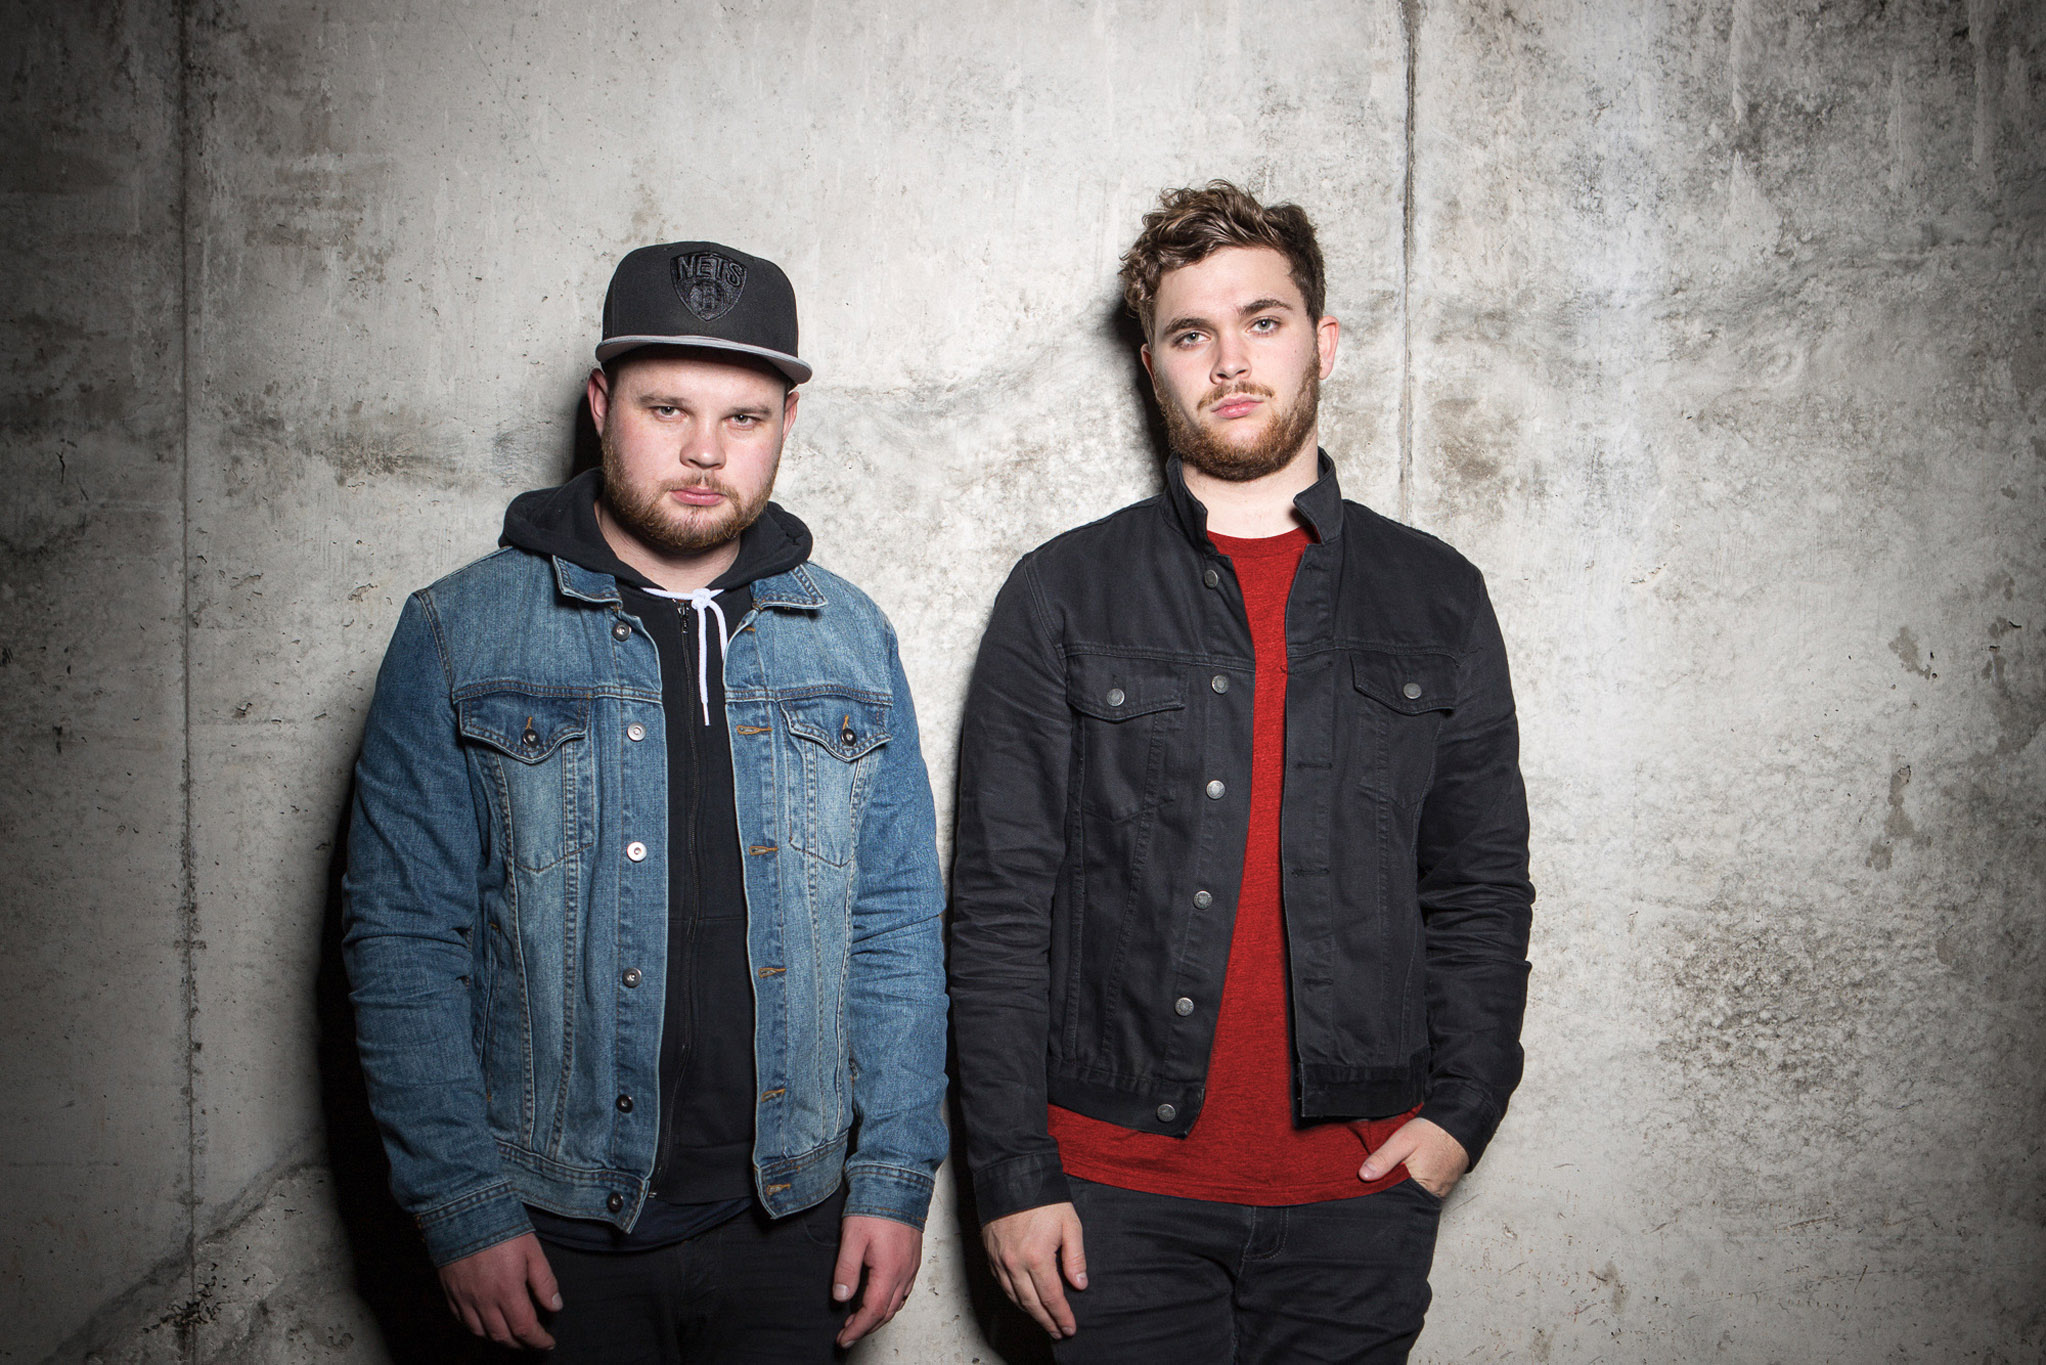 HD wallpaper featuring two members of the band tagged as Royal Blood standing against a textured concrete wall, ideal for a desktop background.